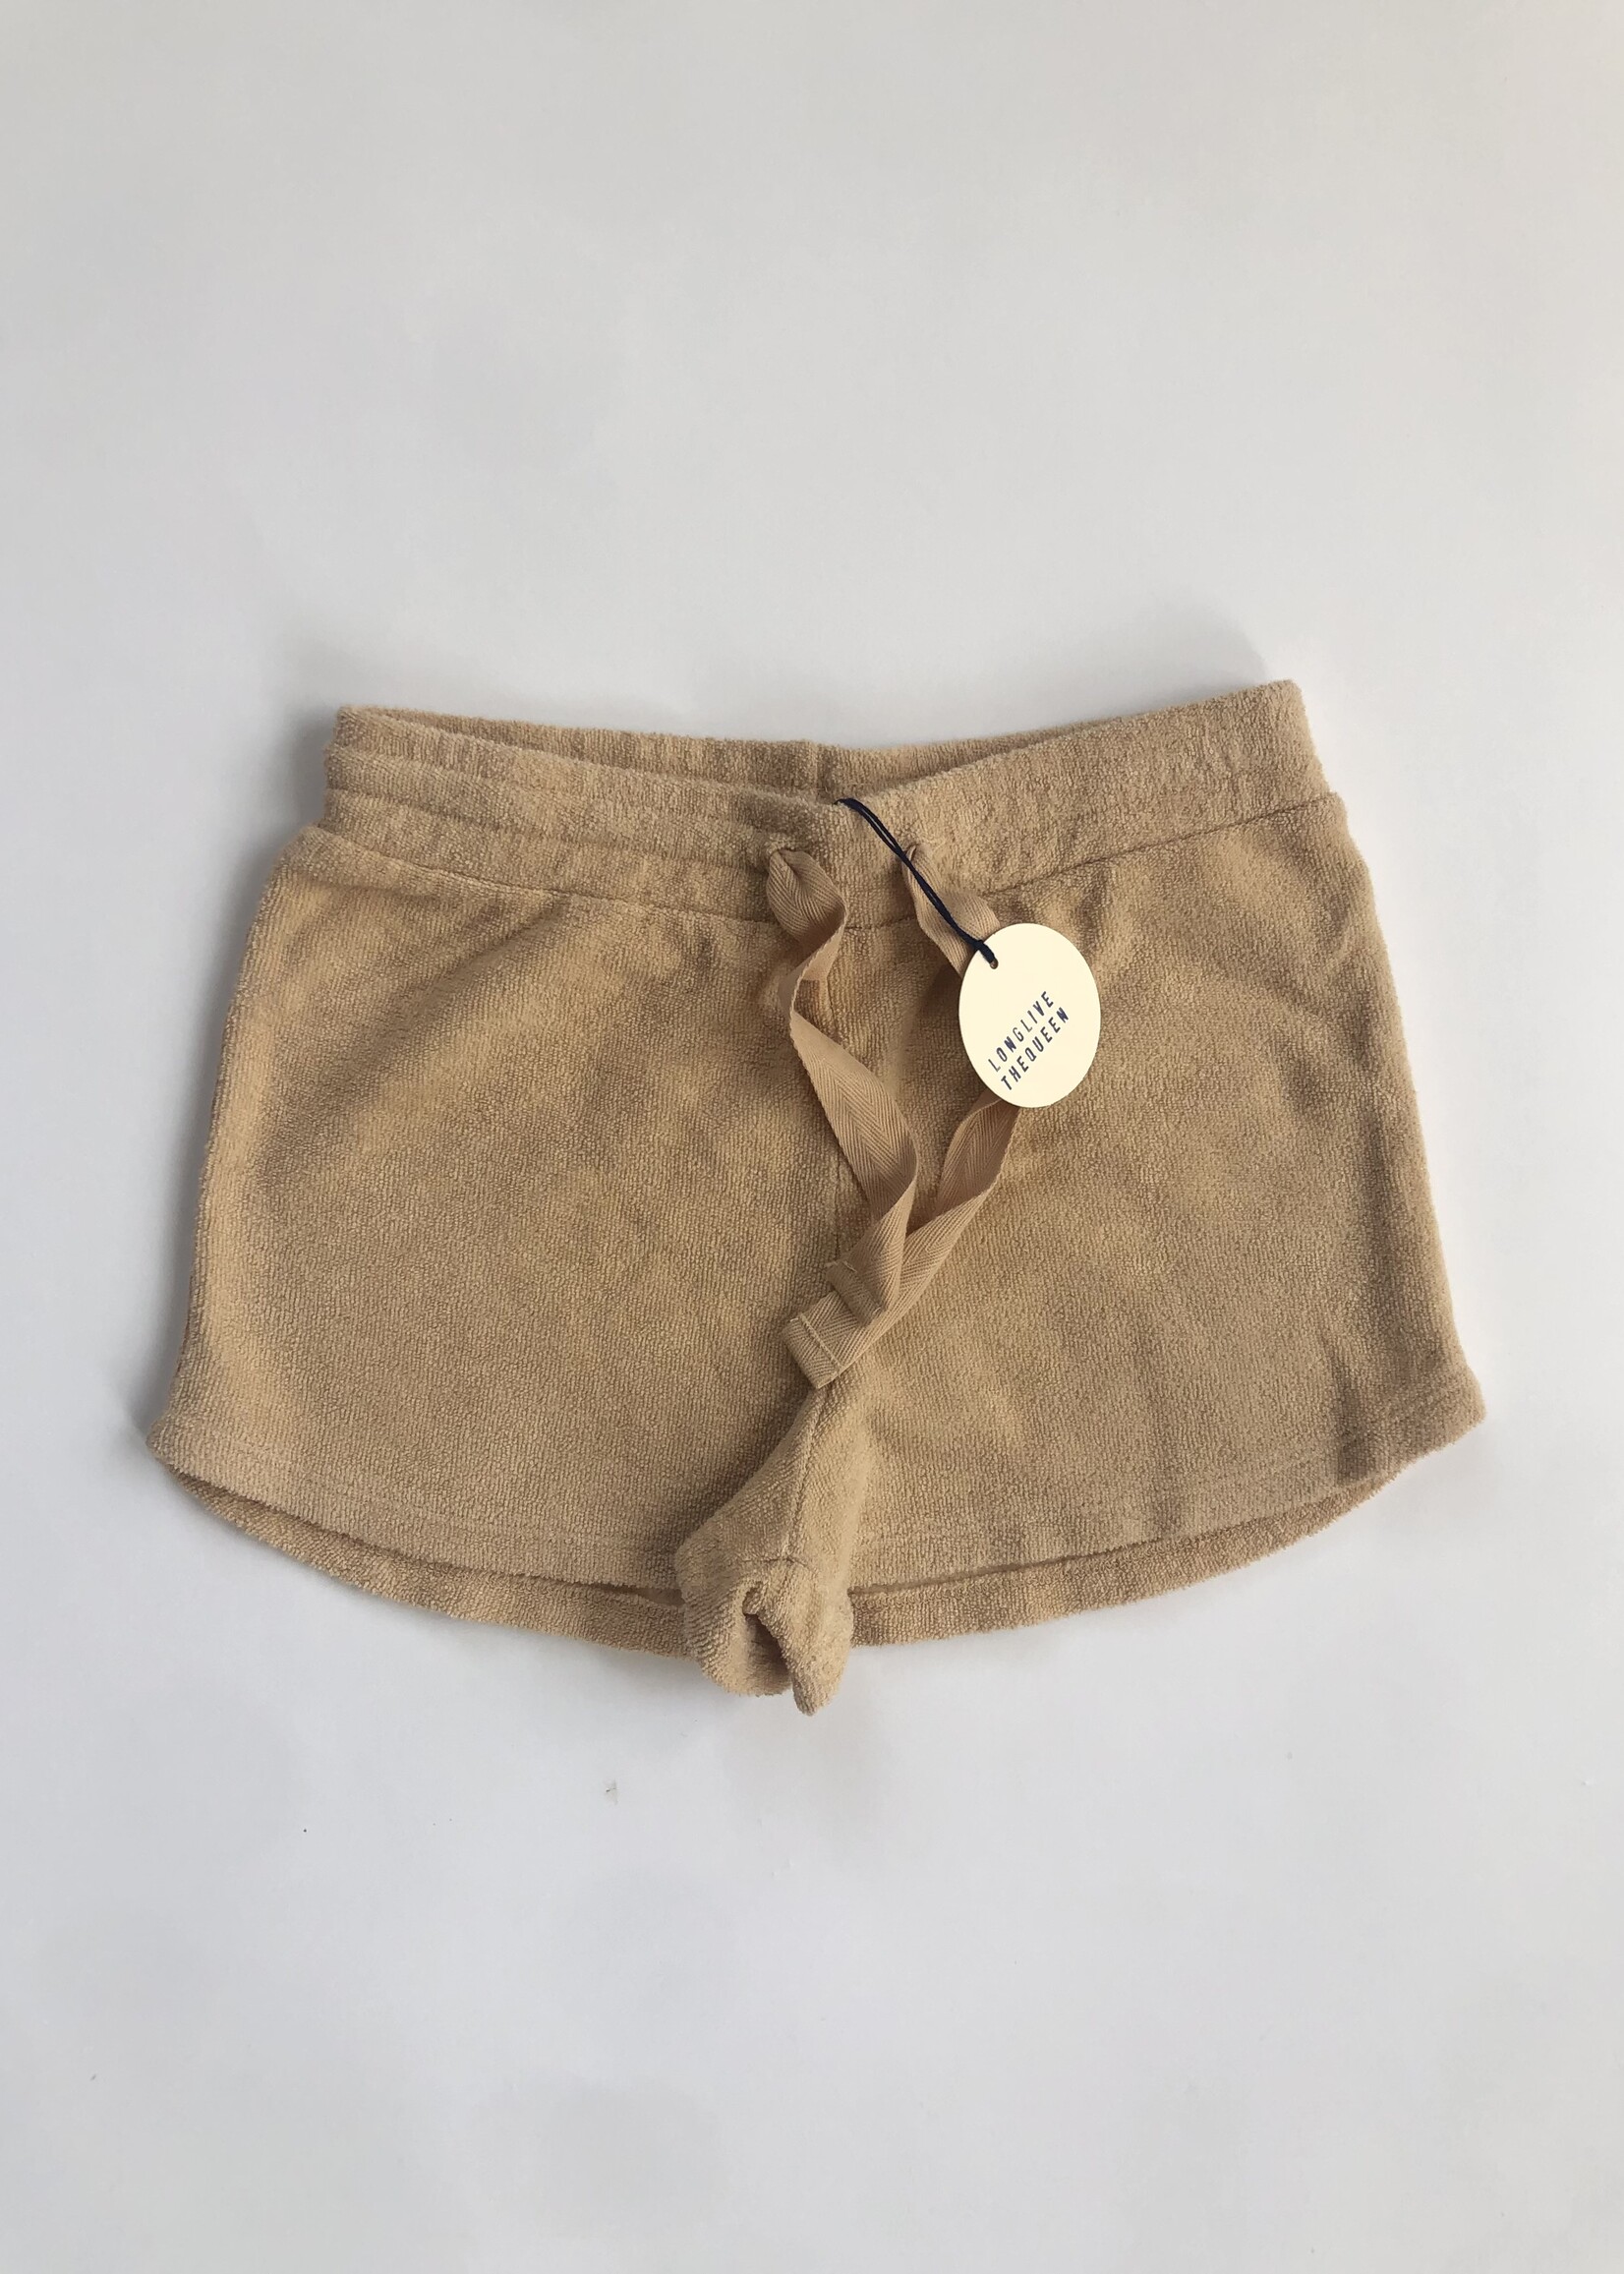 Long Live The Queen Jogger short yellow sand 8y